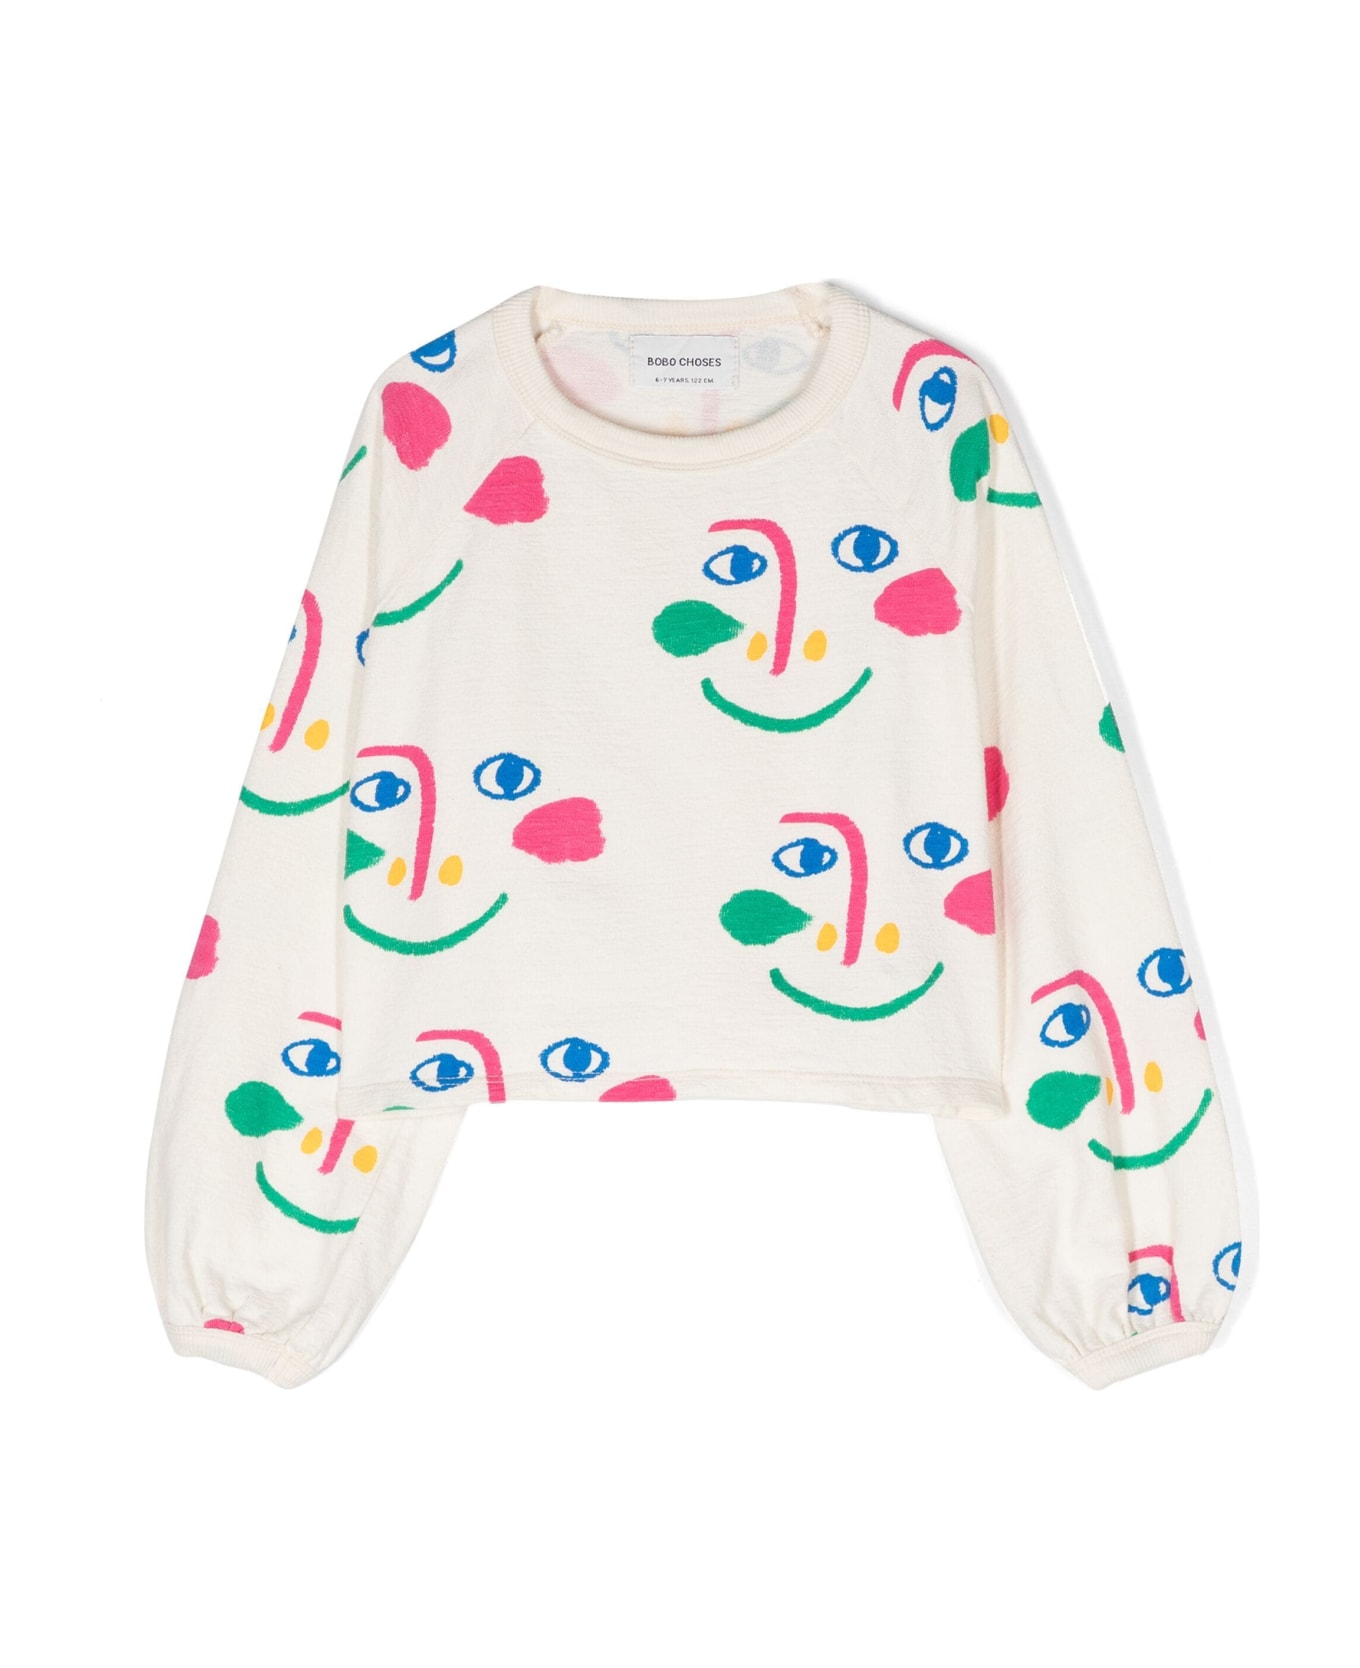 Bobo Choses Ivory Sweatshirt For Girl With All-over Multicolor Face - Ivory